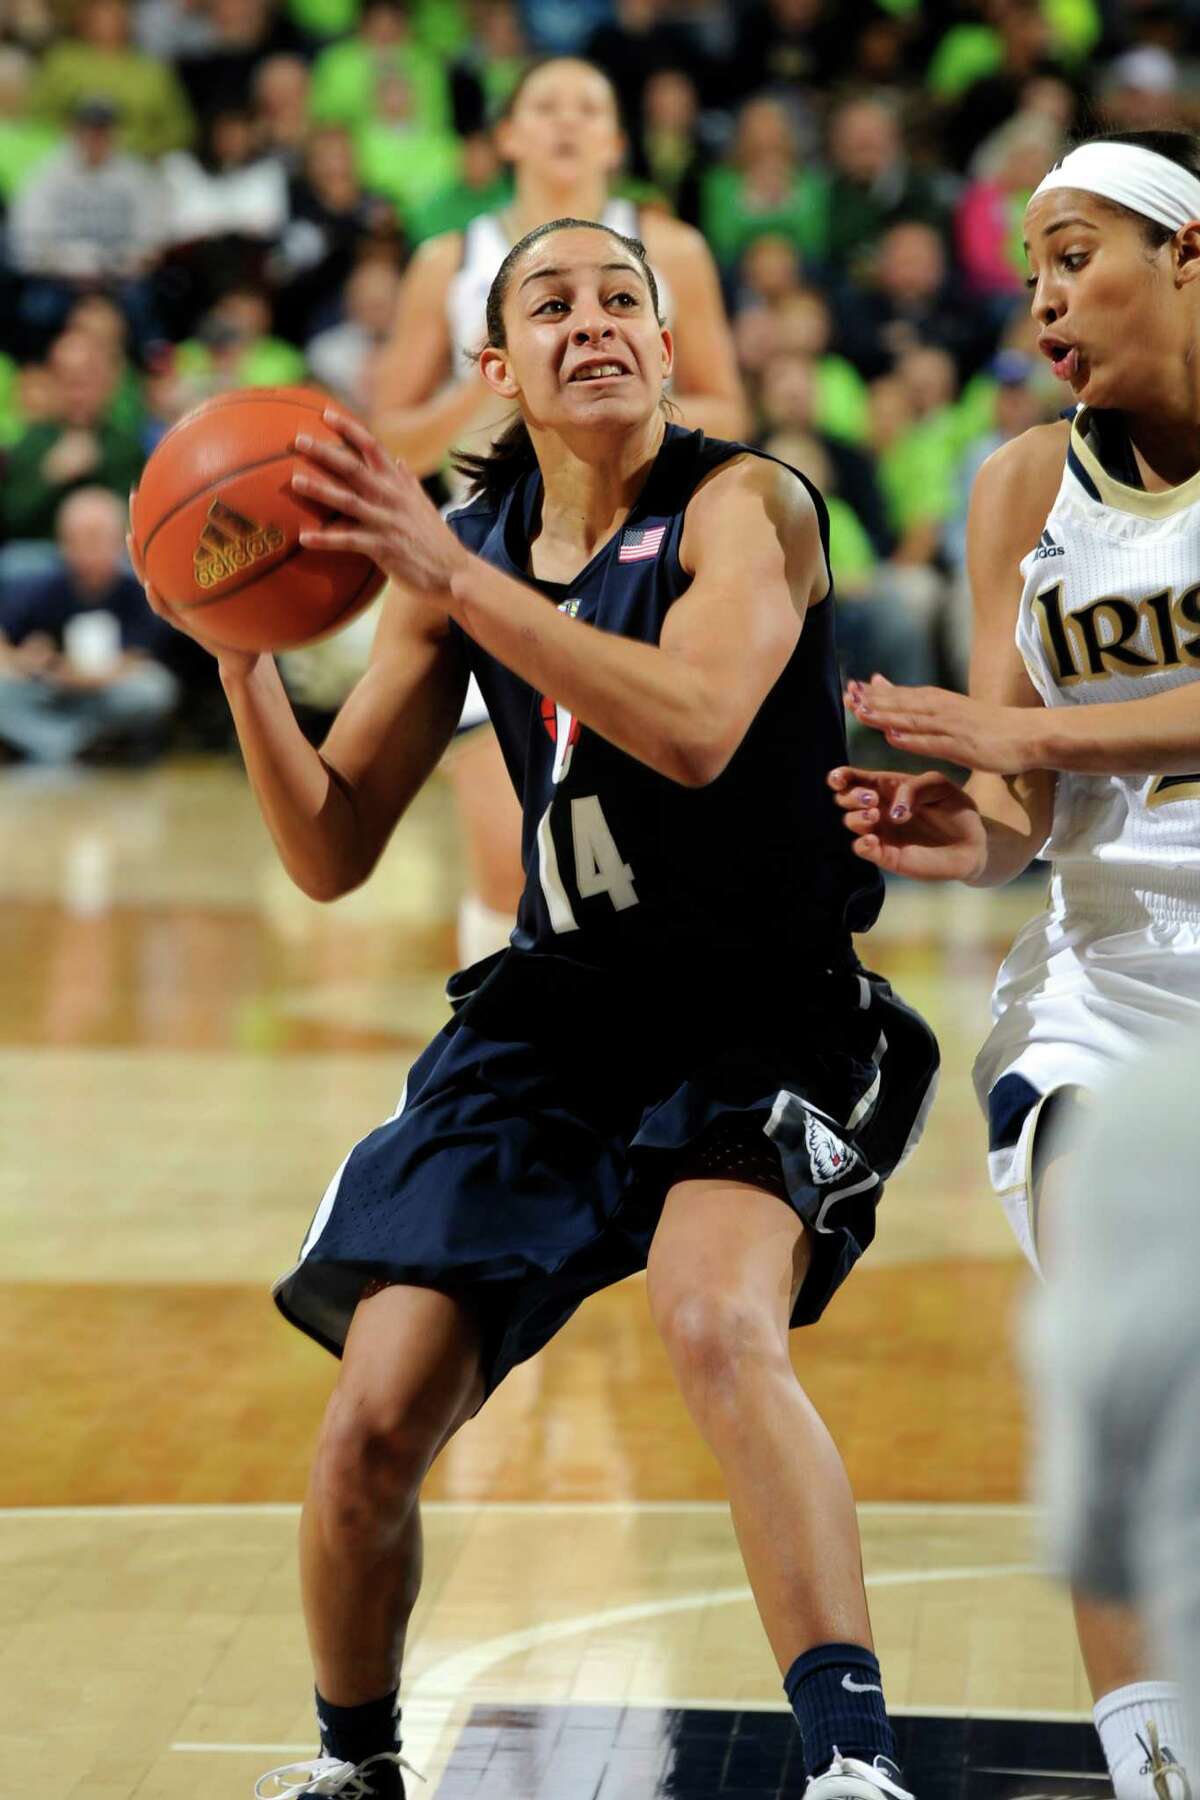 Connecticut guard Bria Hartley, left, heads up court as Notre Dame guard Skylar Diggins defends during action in a college basketball game Monday March 4, 2013 in South Bend, Ind. (AP Photo/Joe Raymond)